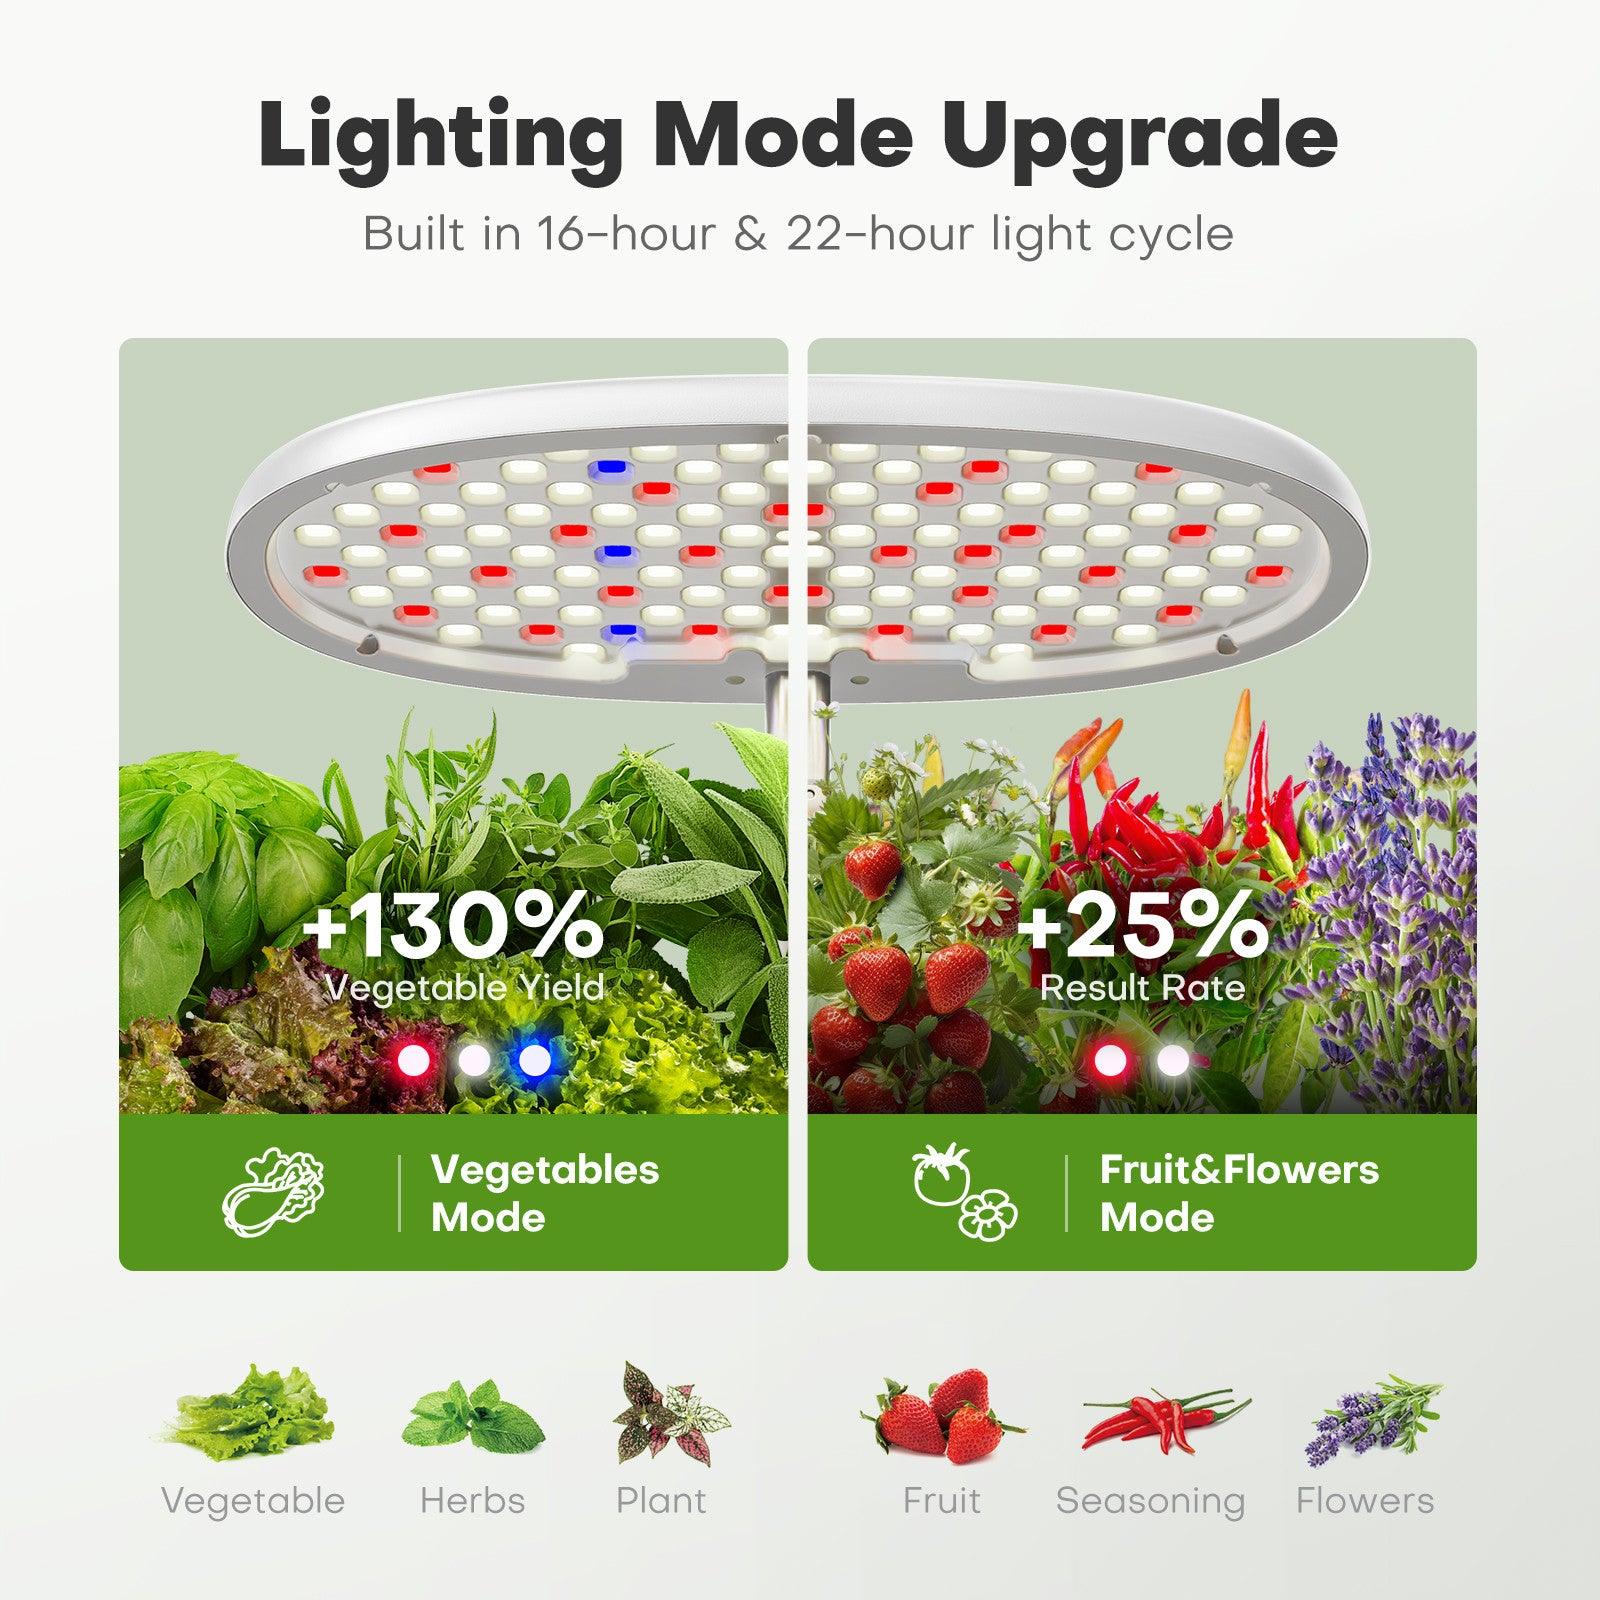 Lighting Mode Upgrade to Boost Yields by Up to 130%